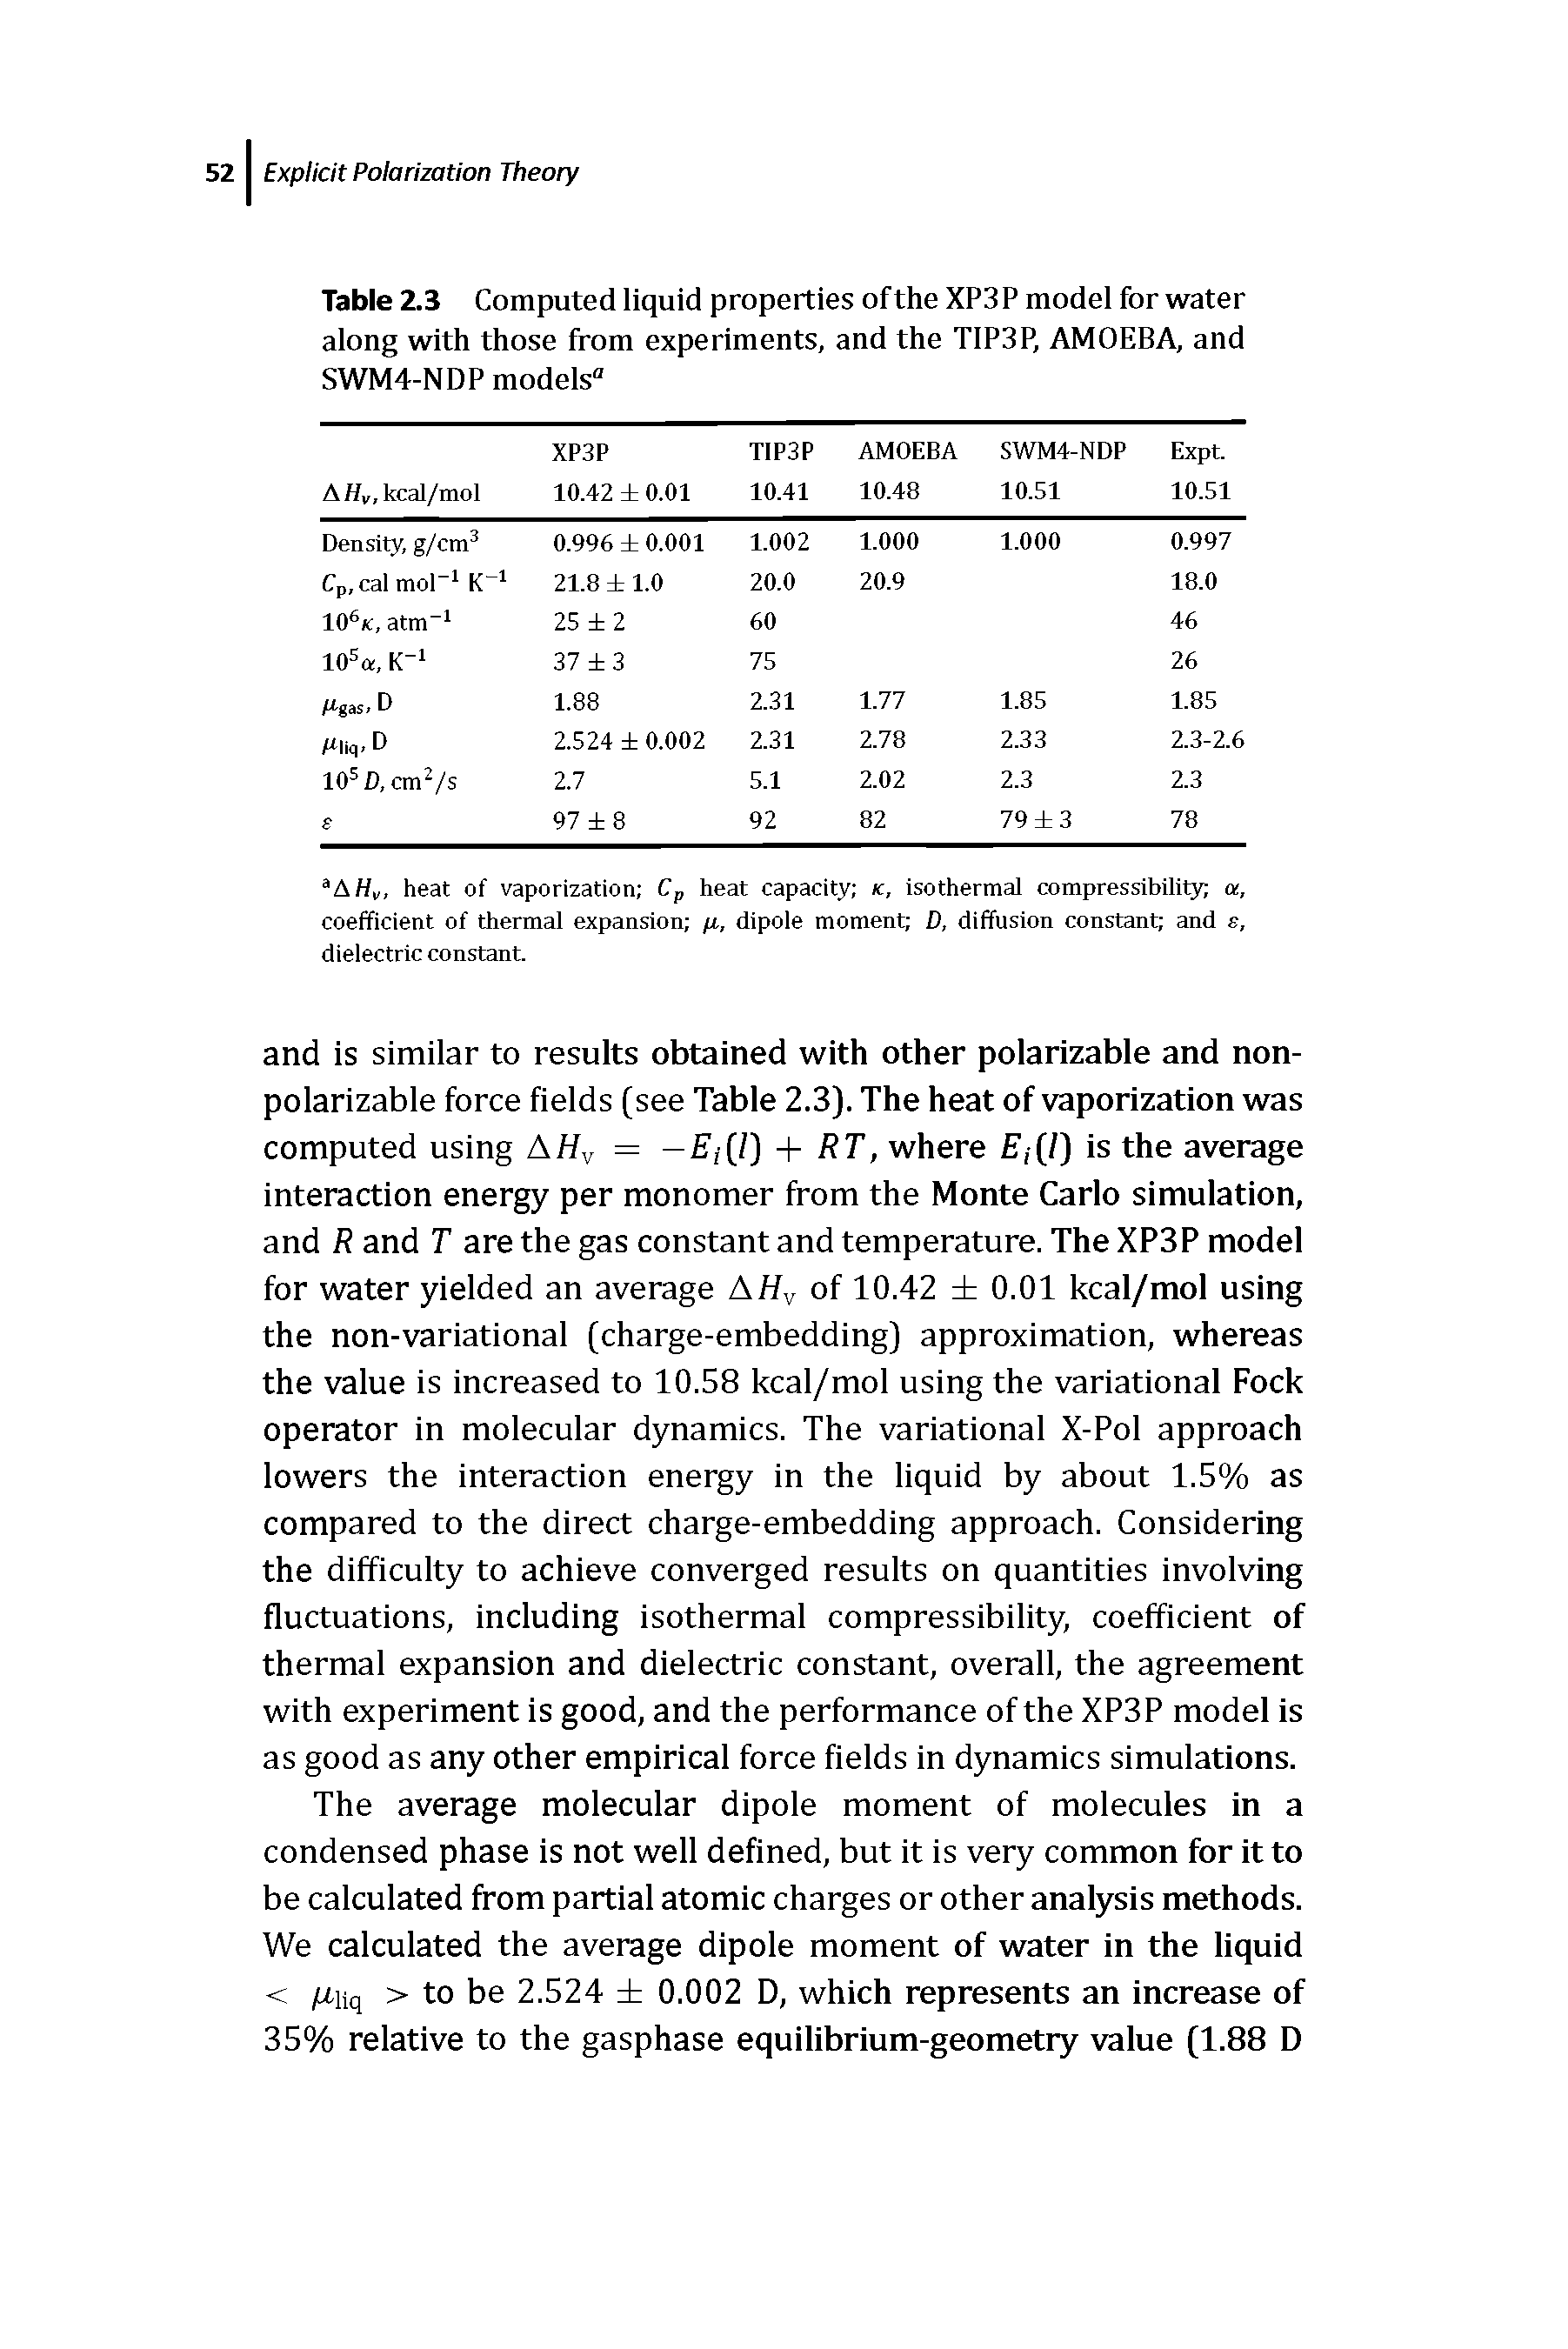 Table 2.3 Computed liquid properties of the XP3 P model for water along with those from experiments, and the T1P3P, AMOEBA, and SWM4-NDP models"...